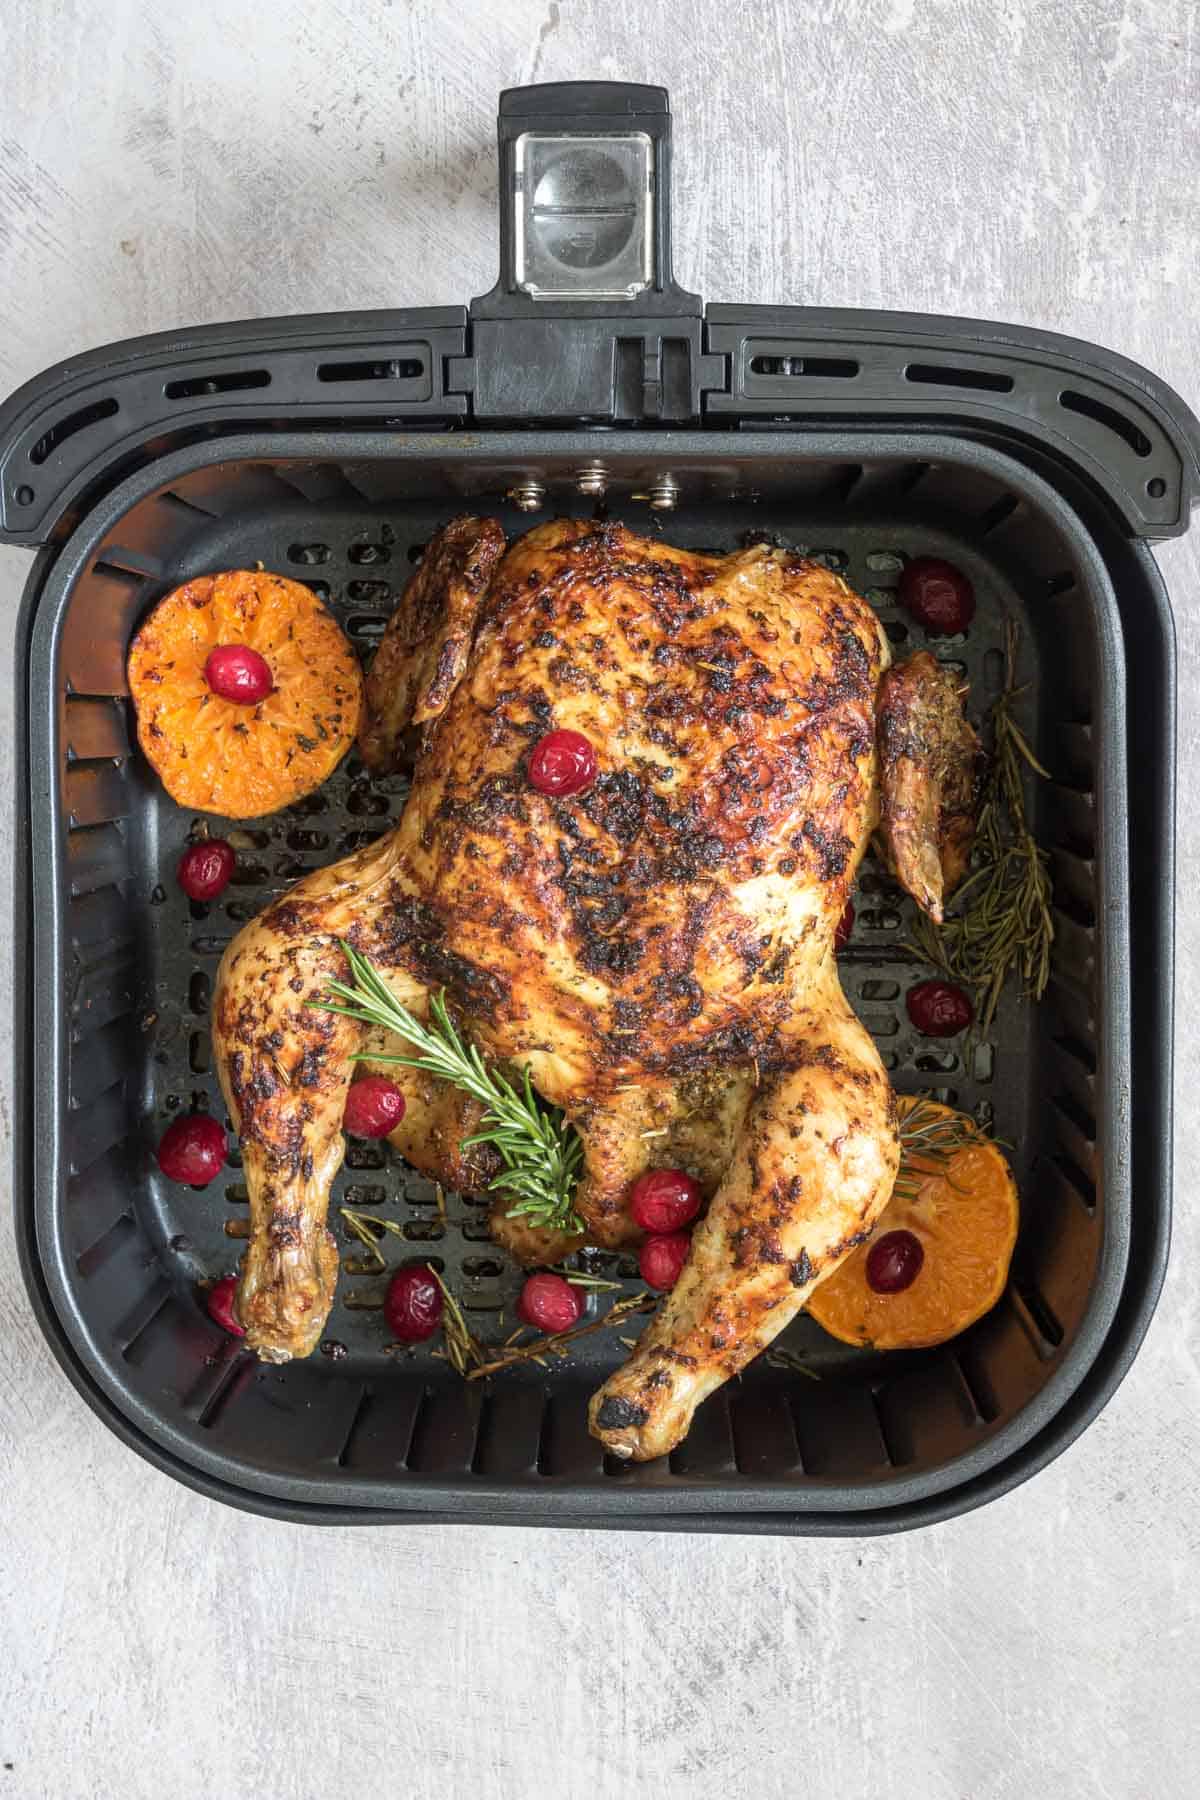 top down view of the completed christmas chicken inside the air fryer basket